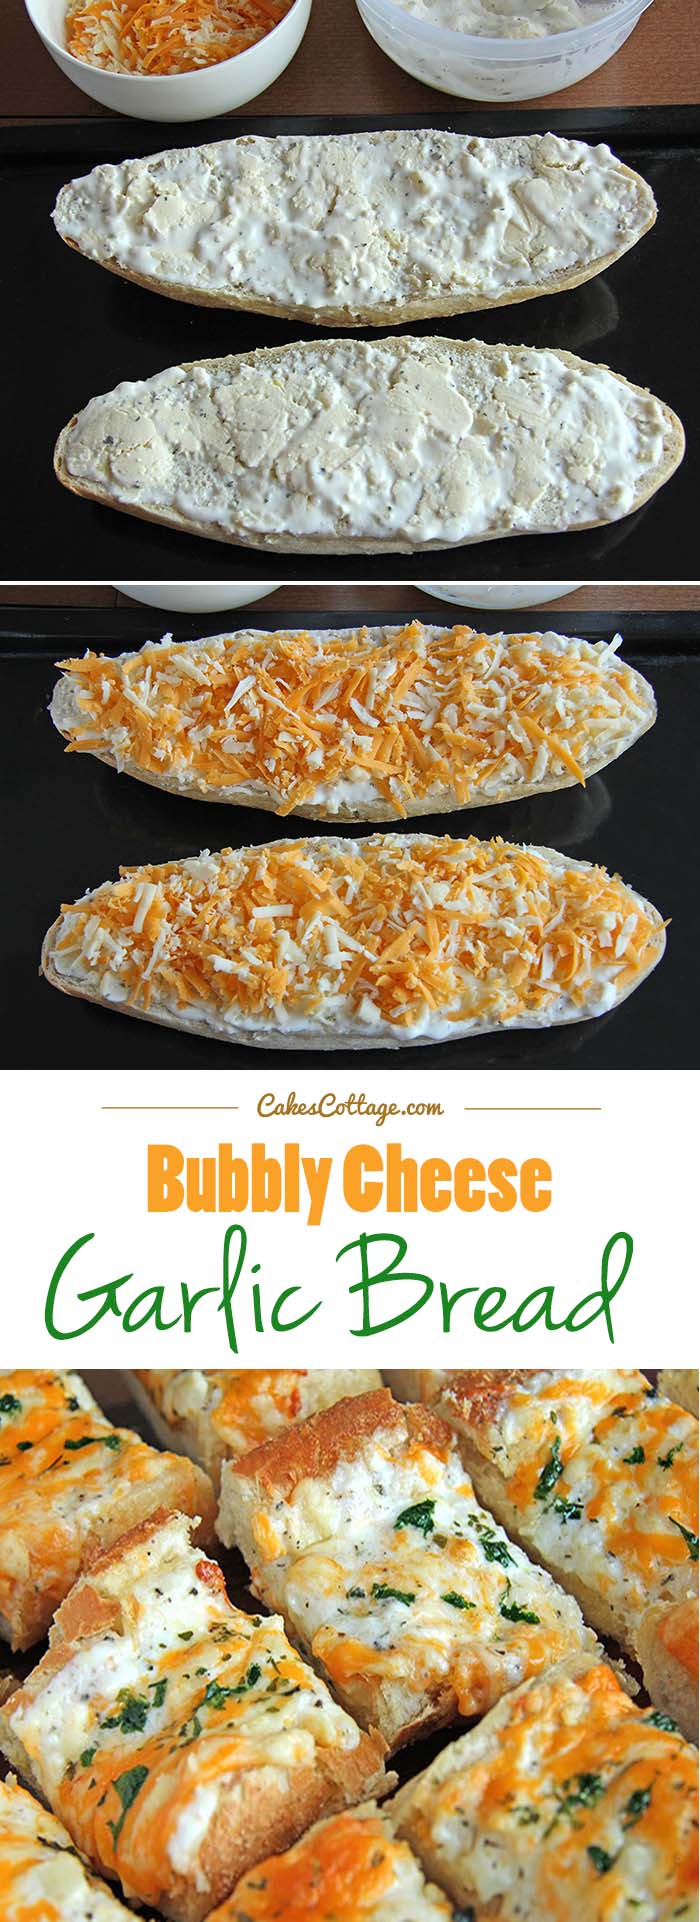 This bread is melty and hot and gooey and bubbly. Perfect for watching a football game or having friends over. #bread #superbowl #cheese